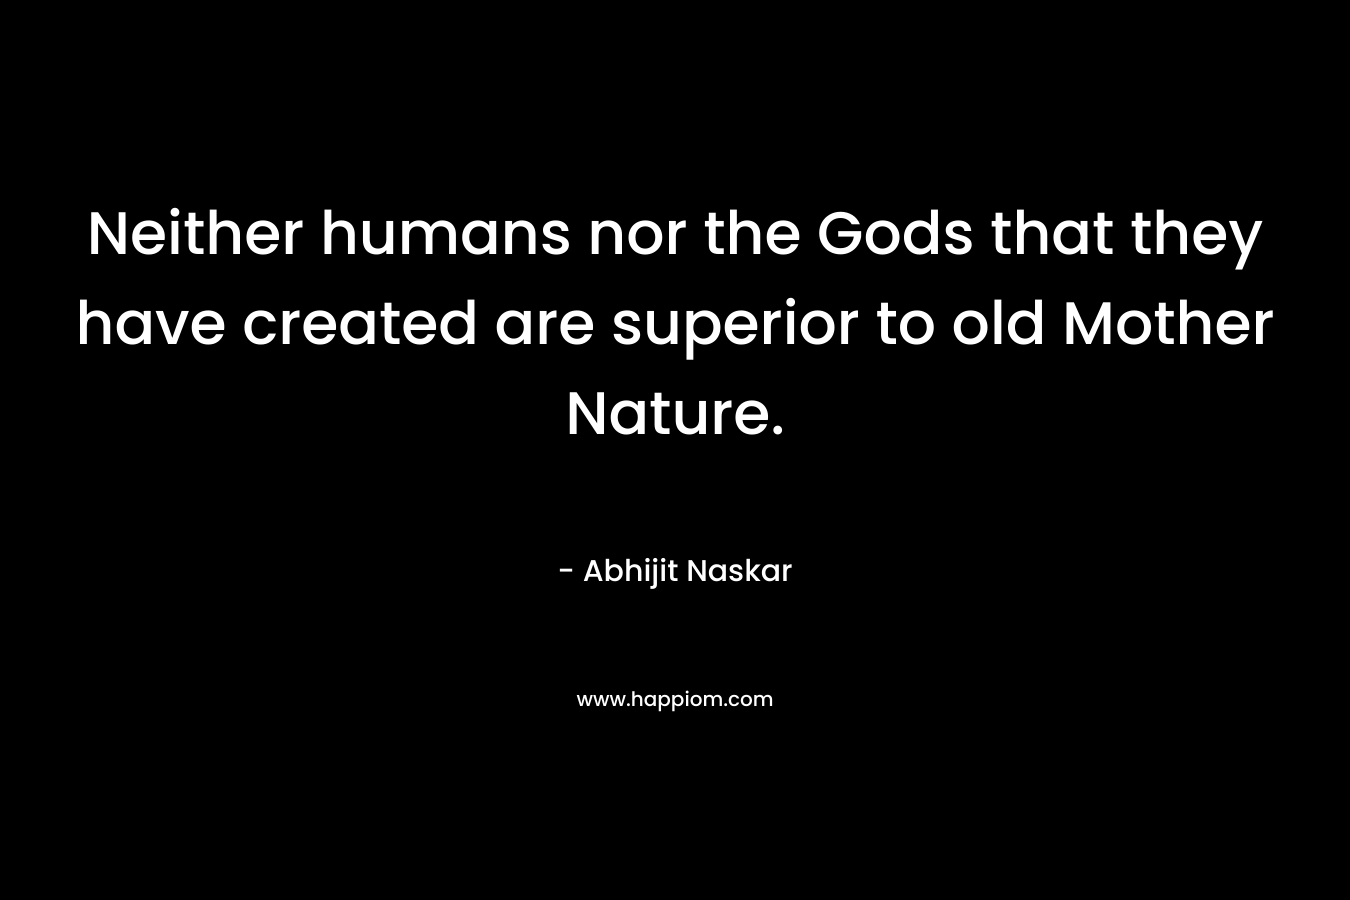 Neither humans nor the Gods that they have created are superior to old Mother Nature.